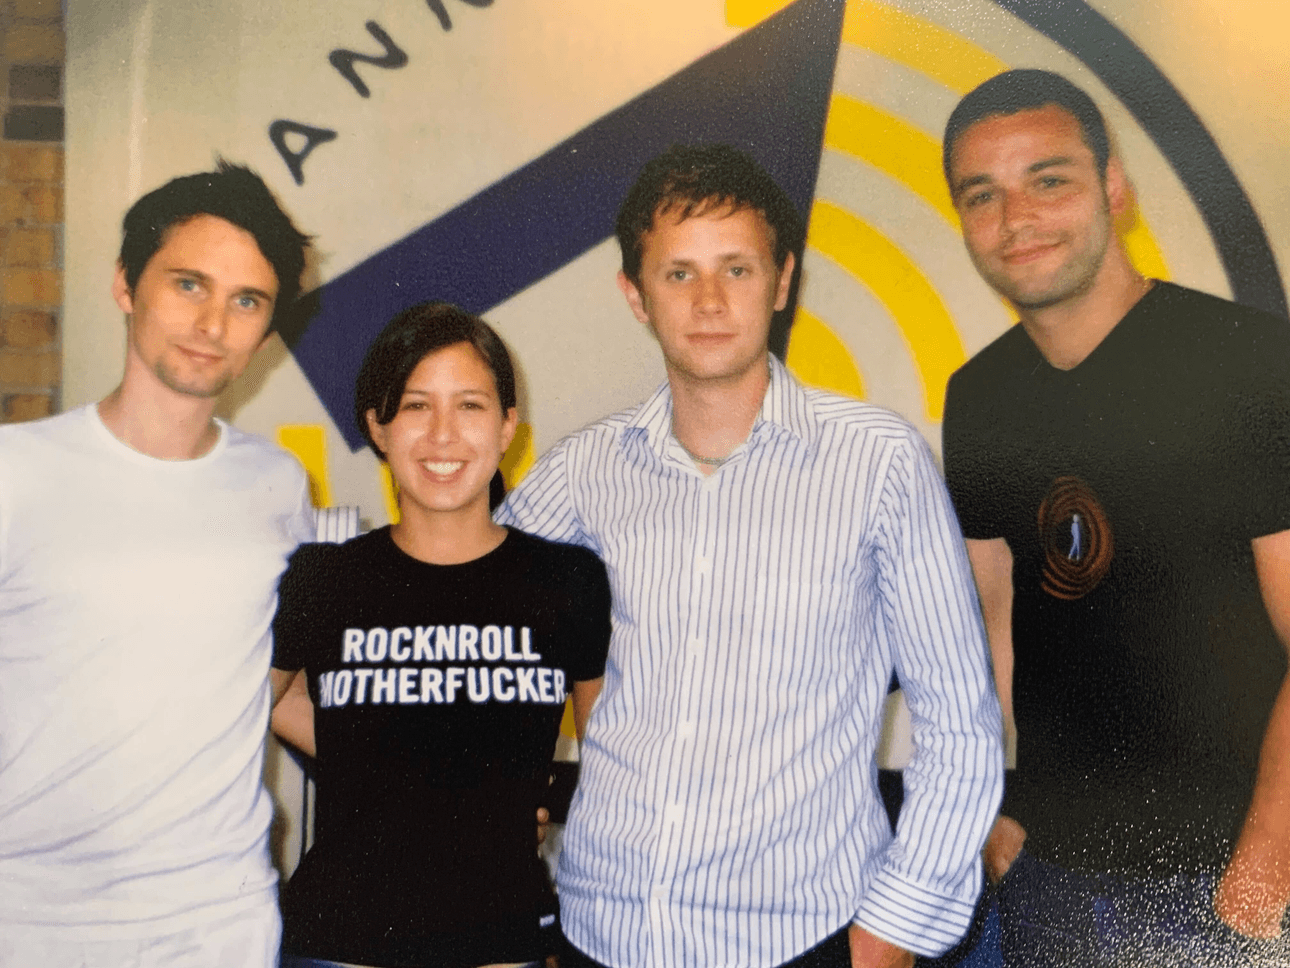 Jane Yee and Muse